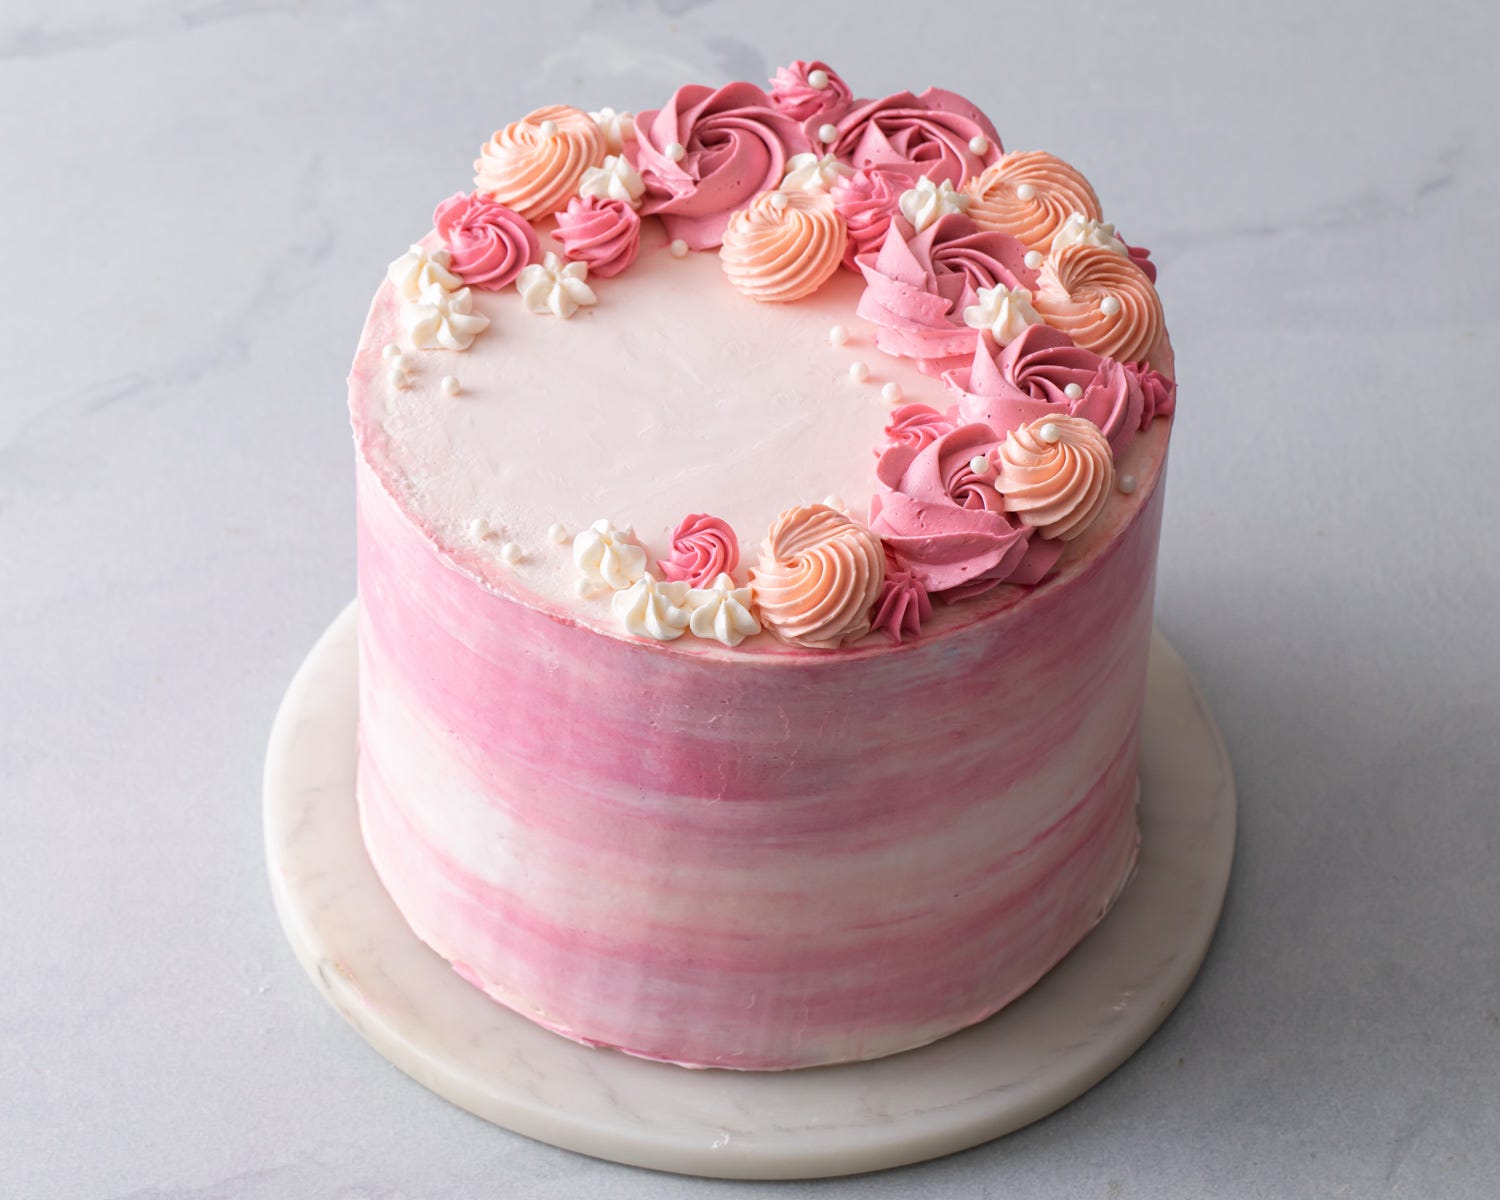 Beautiful Buttercream Tulip Cake With Russian Piping Tips - Cake Style